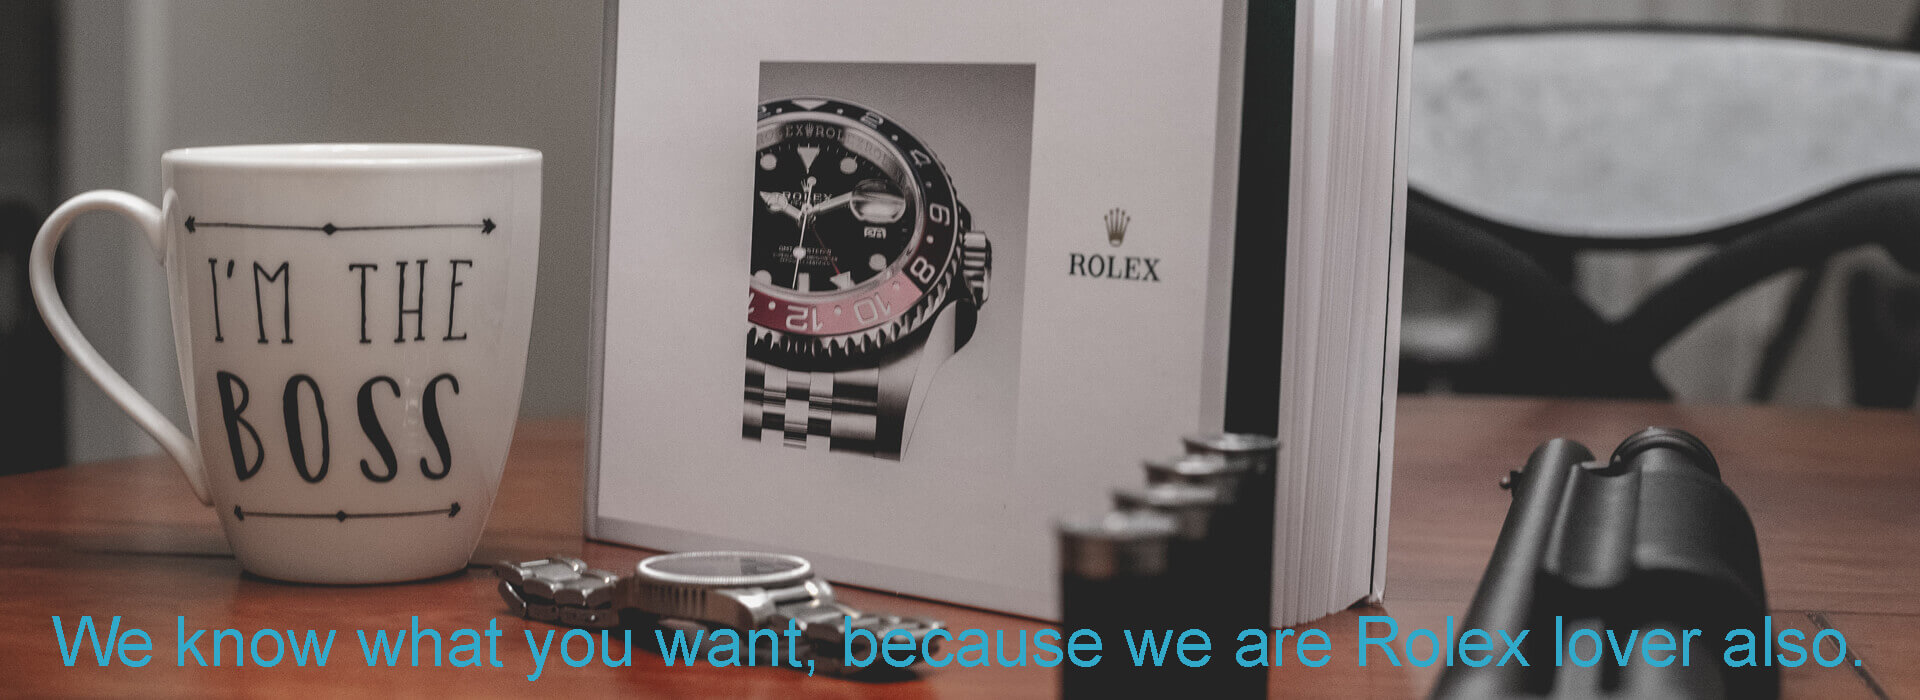 we are Rolex lovers also